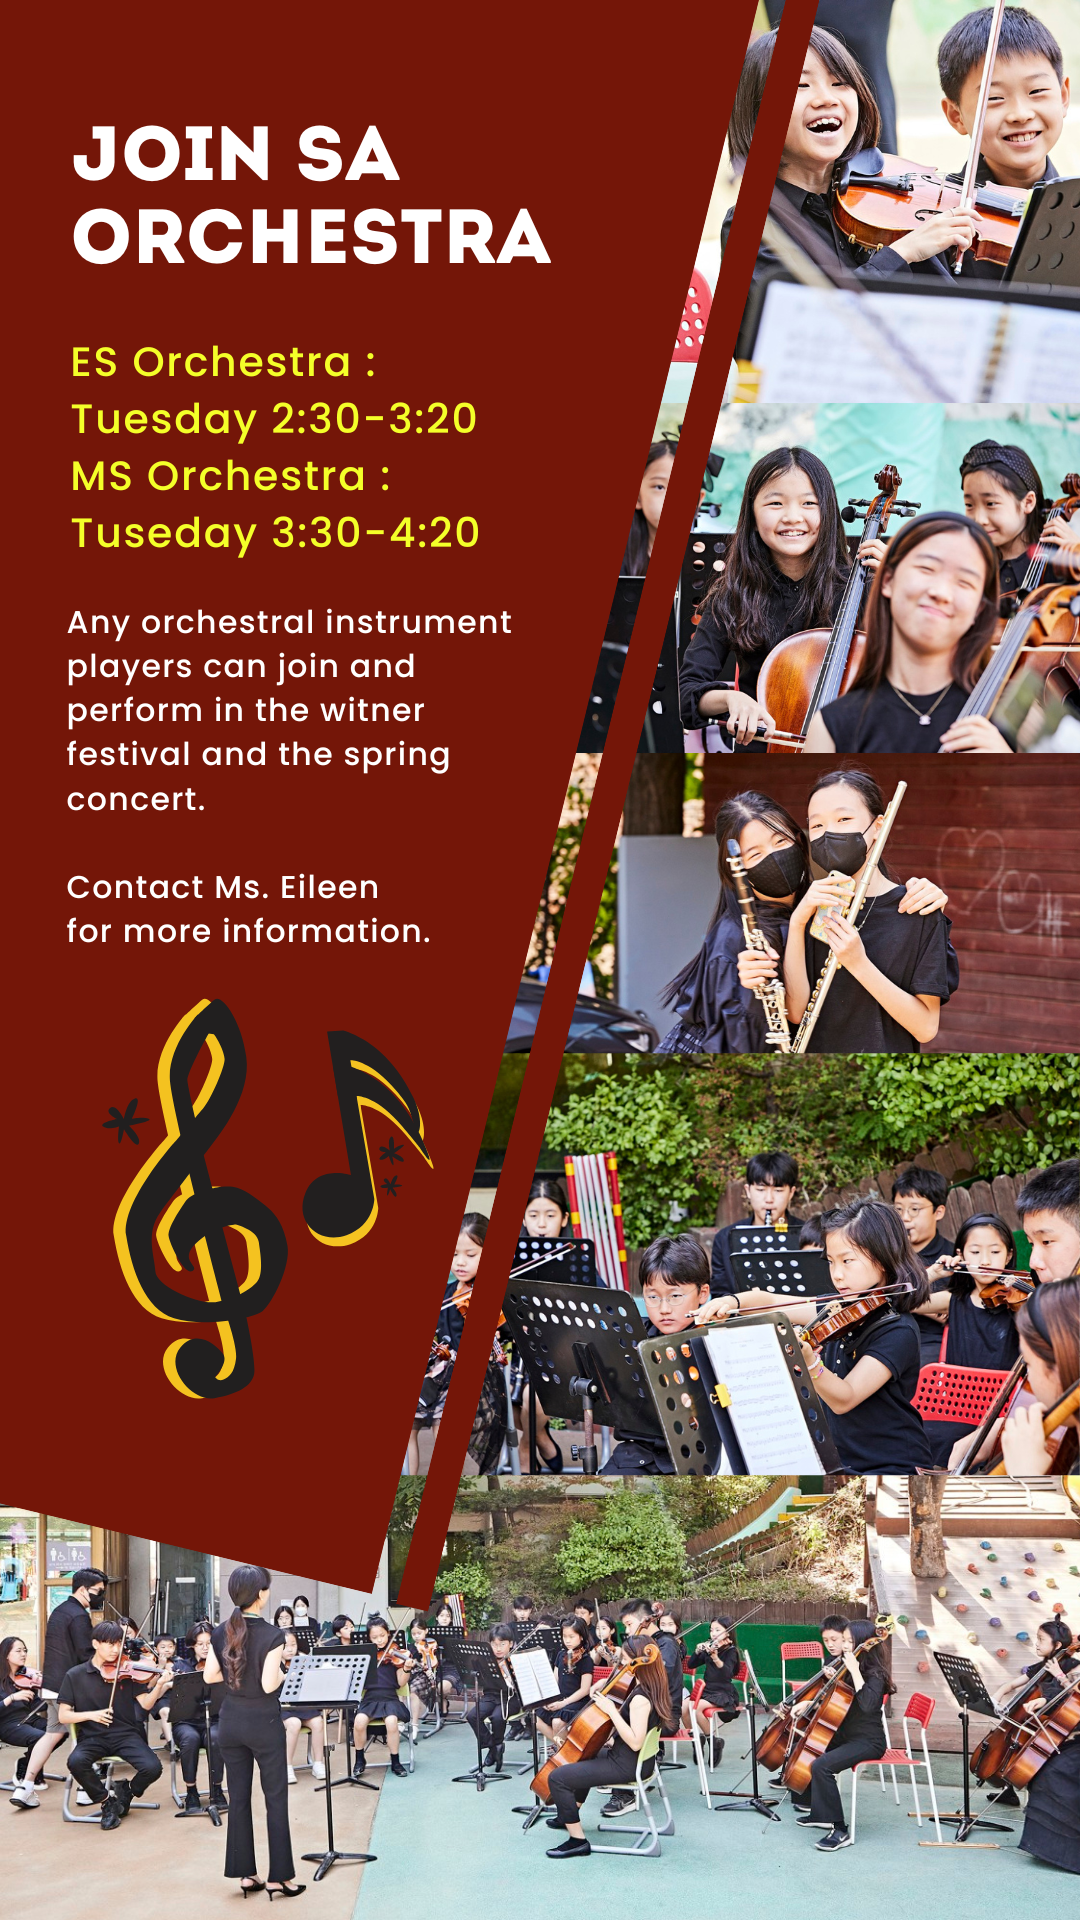 MS Orchestra